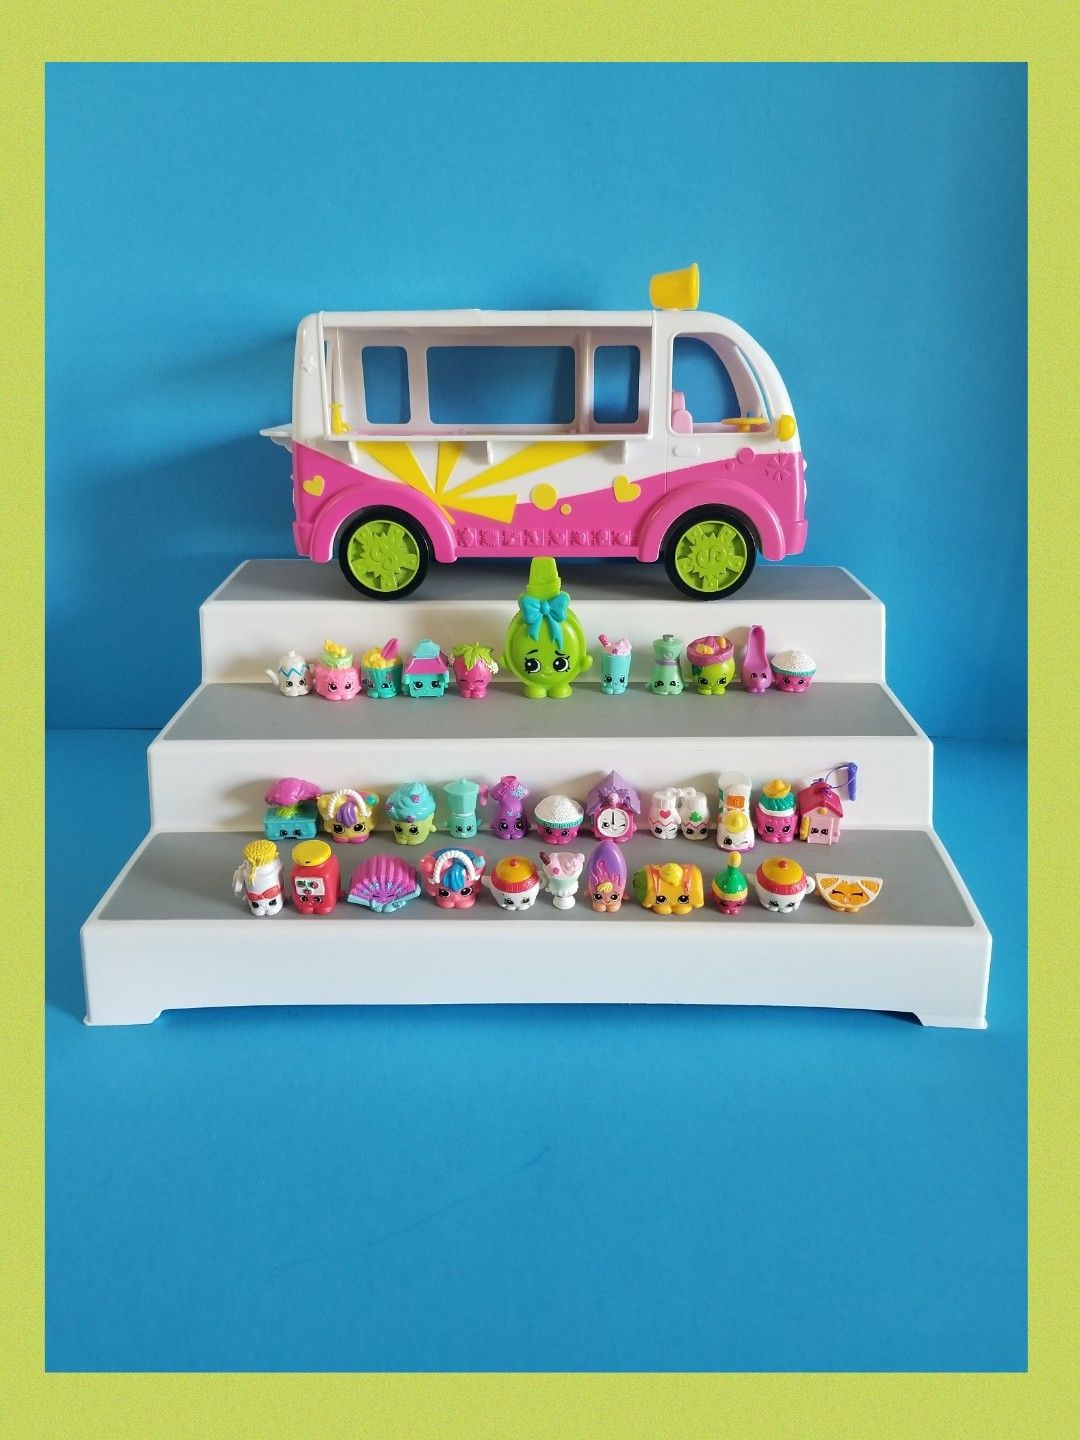 Lot of 33 Shopkins with scoops Ice Cream Truck. (display - stand not include)